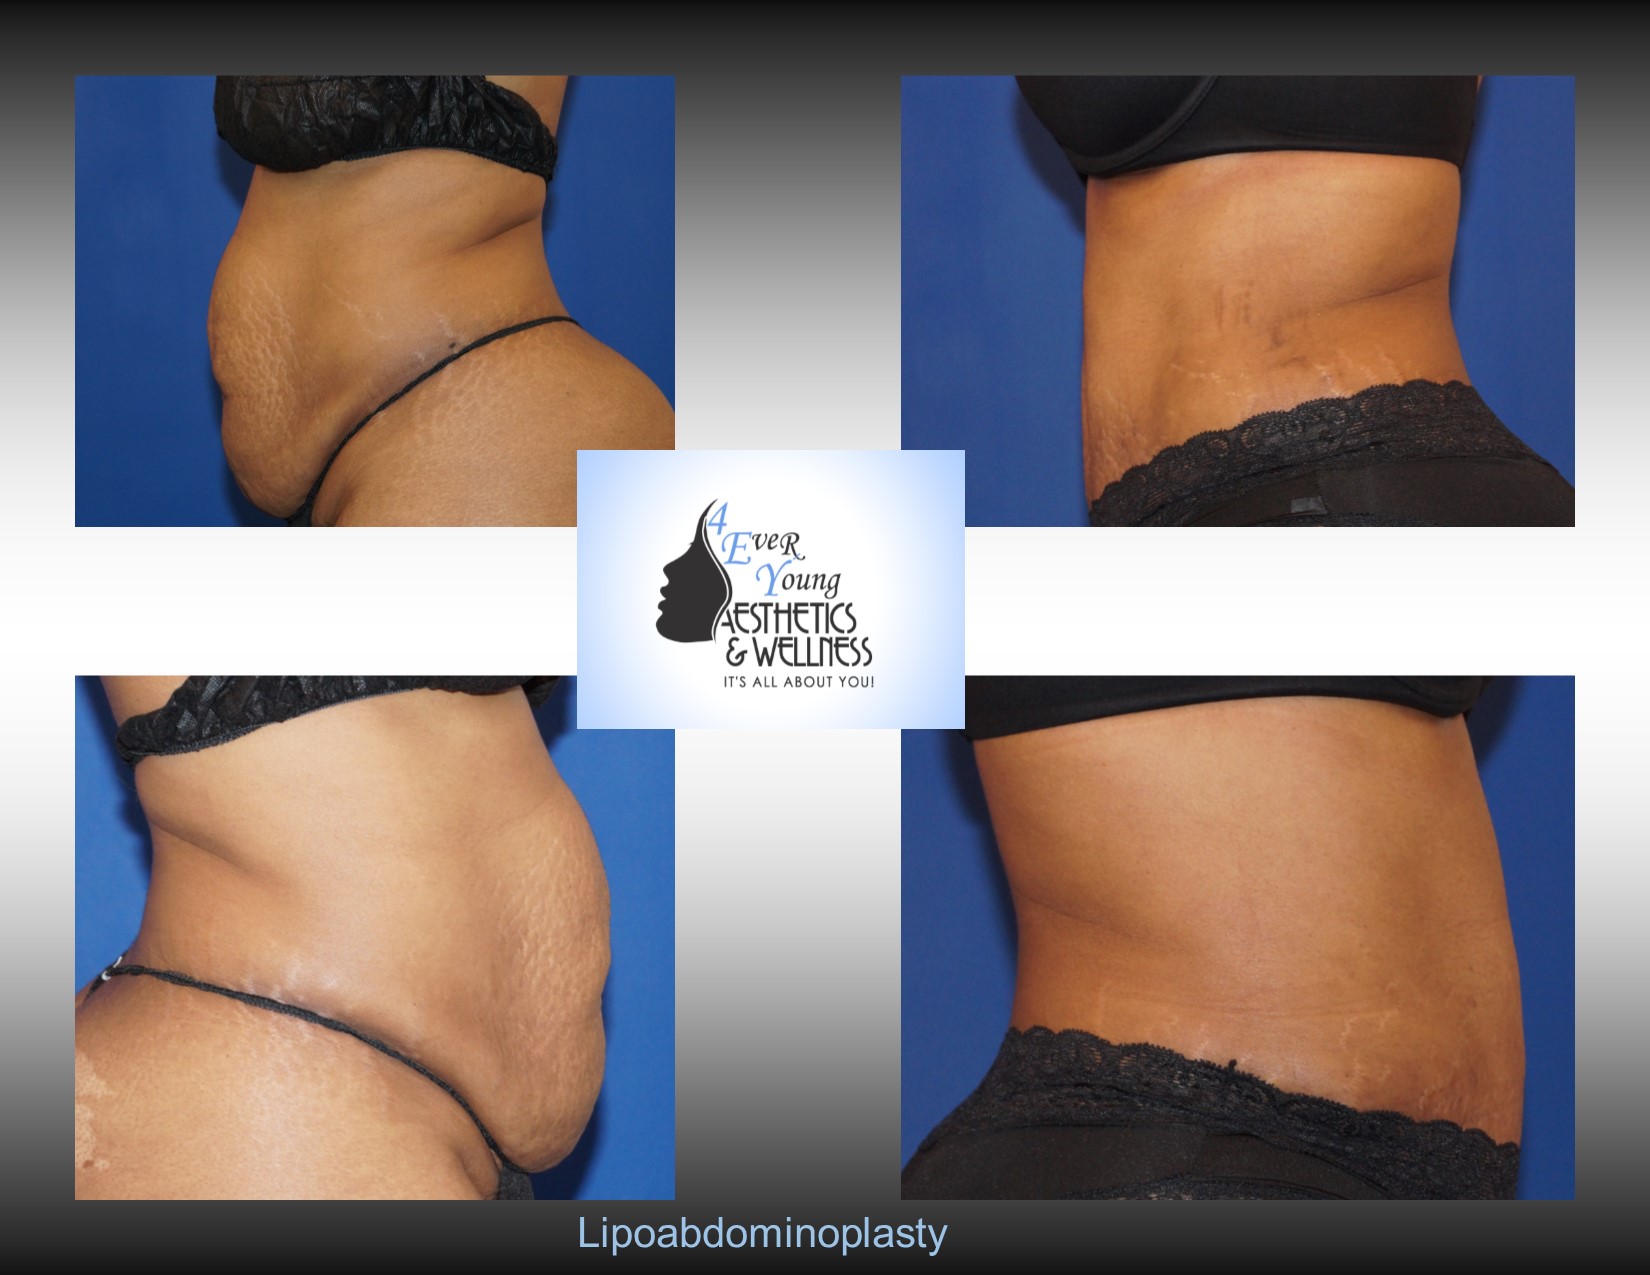 Tummy Tuck Atlanta, Tummy Tuck, also known as abdominoplasty, lipoabdominoplasty, liposuction tummy tuck, is a procedure to that corrects a rectus diasthasis and removes excess or poor quality skin from the abdomen. We combine our tummy tuck with liposuction in order to contour the body resulting in a flat stomach with scars that are placed low in the bikini line. Our liposuction is accomplished by either traditional tumescent liposuction, laser liposuction (Smartlipo), vaser liposuction with the use of a power assisted liposuction handle to remove fat more thoroughly and rapidly. We use abdominal liposuction, flank liposuction, back liposuction, arm liposuction, thigh liposuction and ankle liposuction to remove unsightly fat from problem areas with our tumescent liposuction procedures with or without sedation. If you desire we use autologous fat transfer (fat grafting) to use the fat obtained as the most natural dermal filler unlike synthetic fillers (Restylane, Juvederm, Sculptra, Radiesse, Belotero, Perlane) to improve fine lines and wrinkles of the face, hand rejuvenation with fat, fat transfer to breast, Brazilian Butt Lift (Butt Augmentation), liposculpture, lip augmentation with fat.  Fat transfer to the breast can be a great alternative to breast augmentation, saline implants, silicone implants, breast augmentation with mastopexy or just to improve volume in the upper pole of the breast. Our autologous fat transfer is second to none and we utilize Platelet-Rich Plasma (PRP) which helps stabilize the fat transfer faster by promoting blood vessels to grow into the fat grafting. Most people think that a Brazilian butt lift (BBL) is a plastic surgery procedure but instead it is a cosmetic surgery procedure strictly performed for enhancement of the buttock area to transform your butt into the big Brazilian butt and replicate the popular Brazilian ass that Brazilian butt women have been getting Brazilian butt lifts to have for years.  As part of our mommy makeover packages you can combine a Brazilian ass with a tummy tuck and/or breast augmentation with a mastopexy, which is more commonly associated with a mommy makeover, brazilian butt lift atlanta, atlanta brazilian butt lift, liposuction plastic surgery, liposuction, laser liposuction. fat grafting, brazilian ass, brazilian butt women, fat transfer, botox, plastic surgery, cosmetic surgery, plastic surgeon, cosmetic surgeon